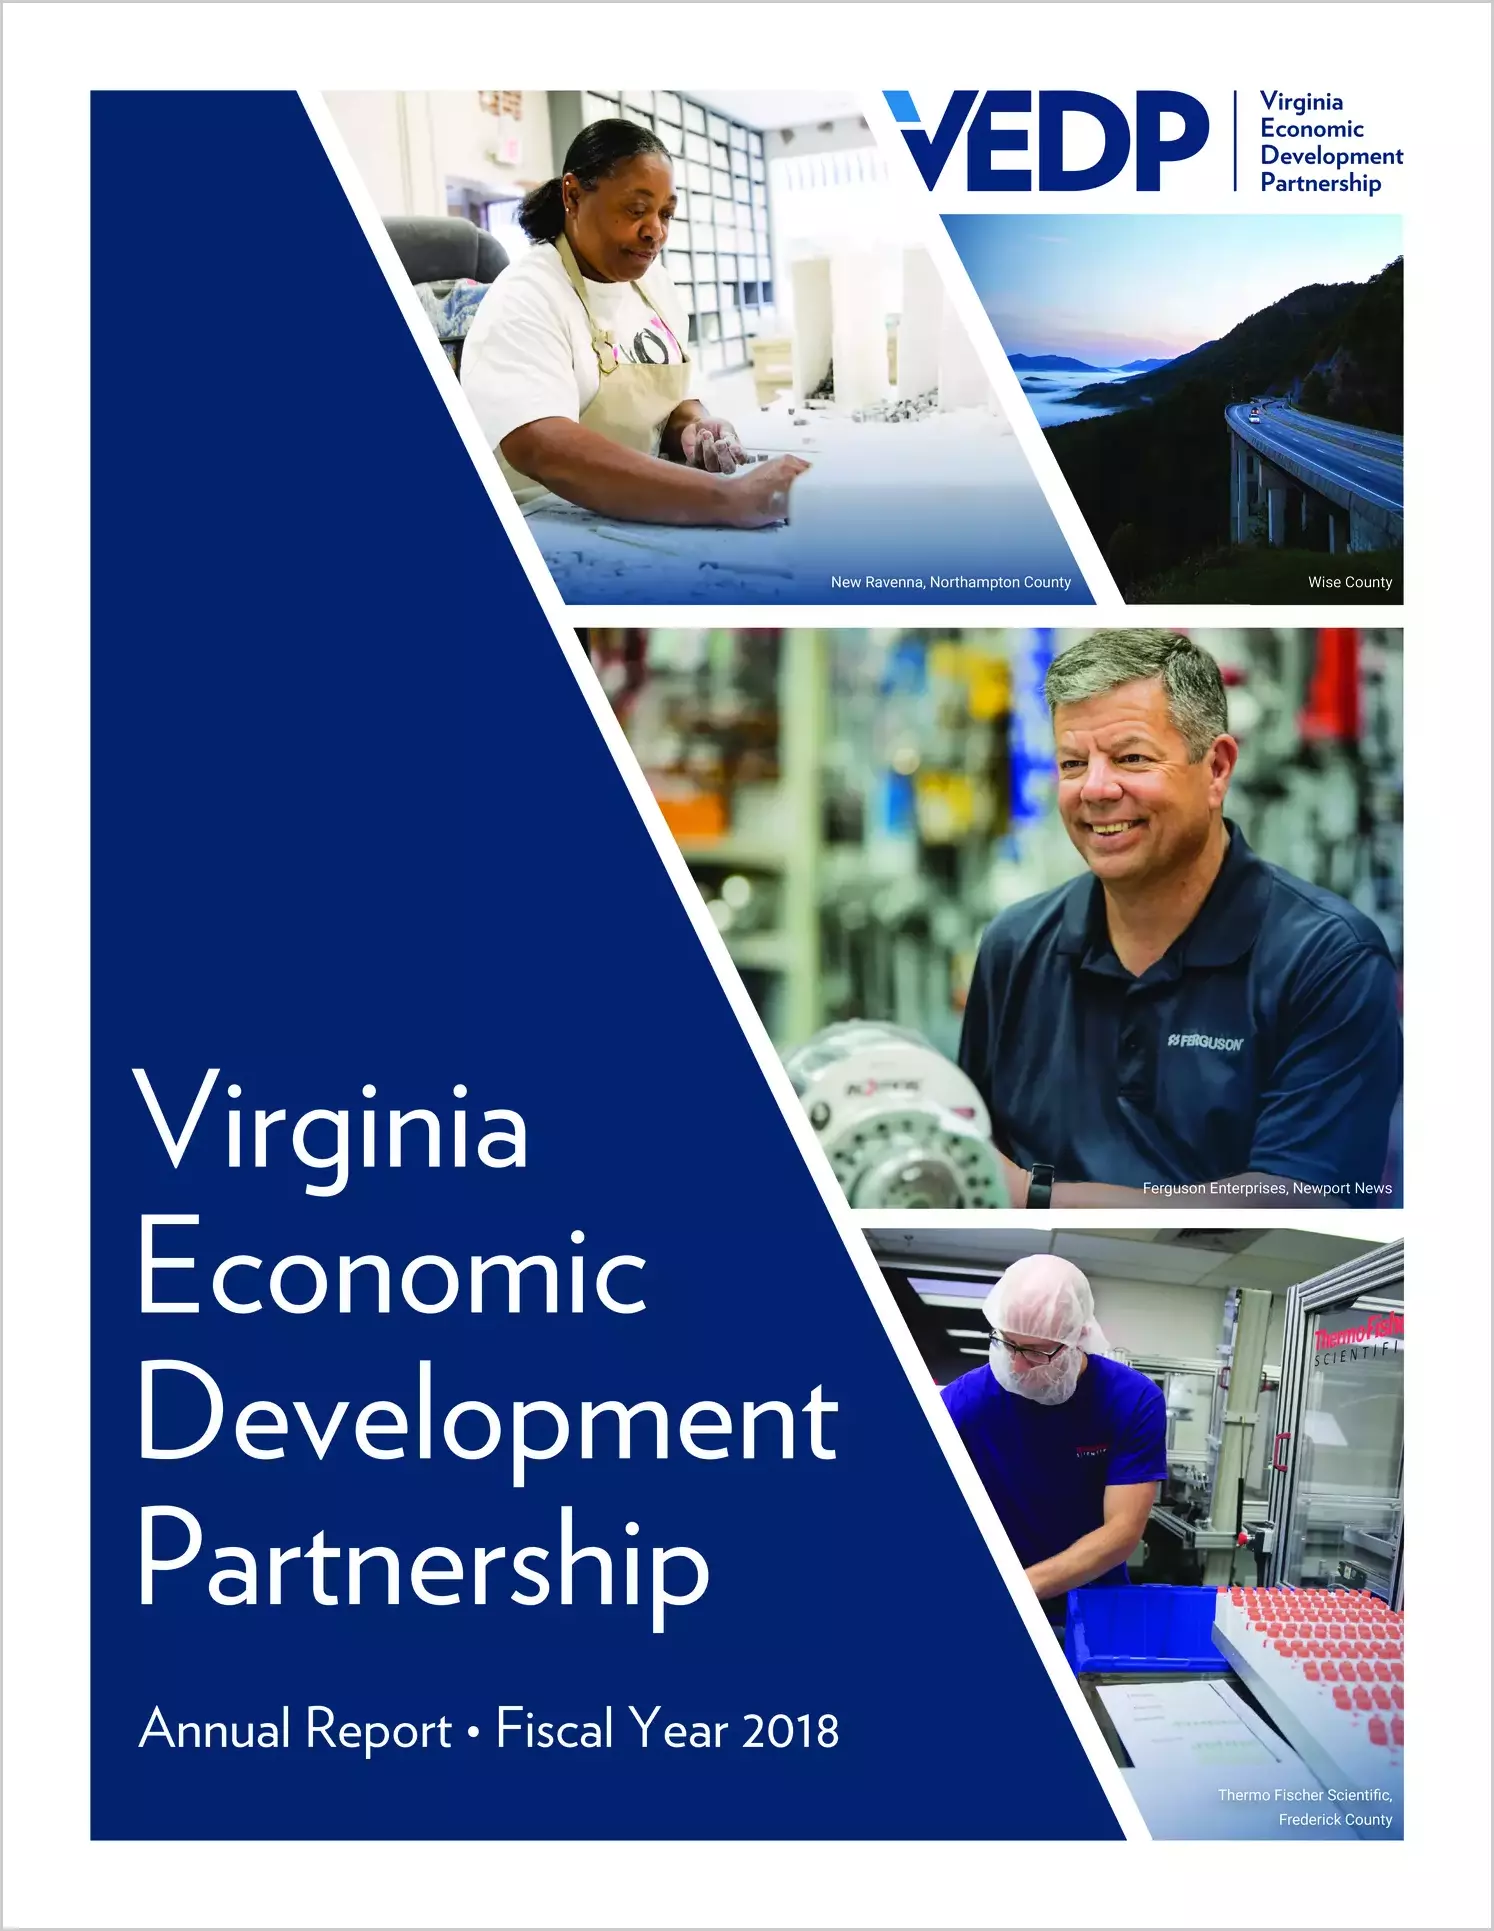 Virginia Economic Development Partnership Financial Statements for the year ended June 30, 2018